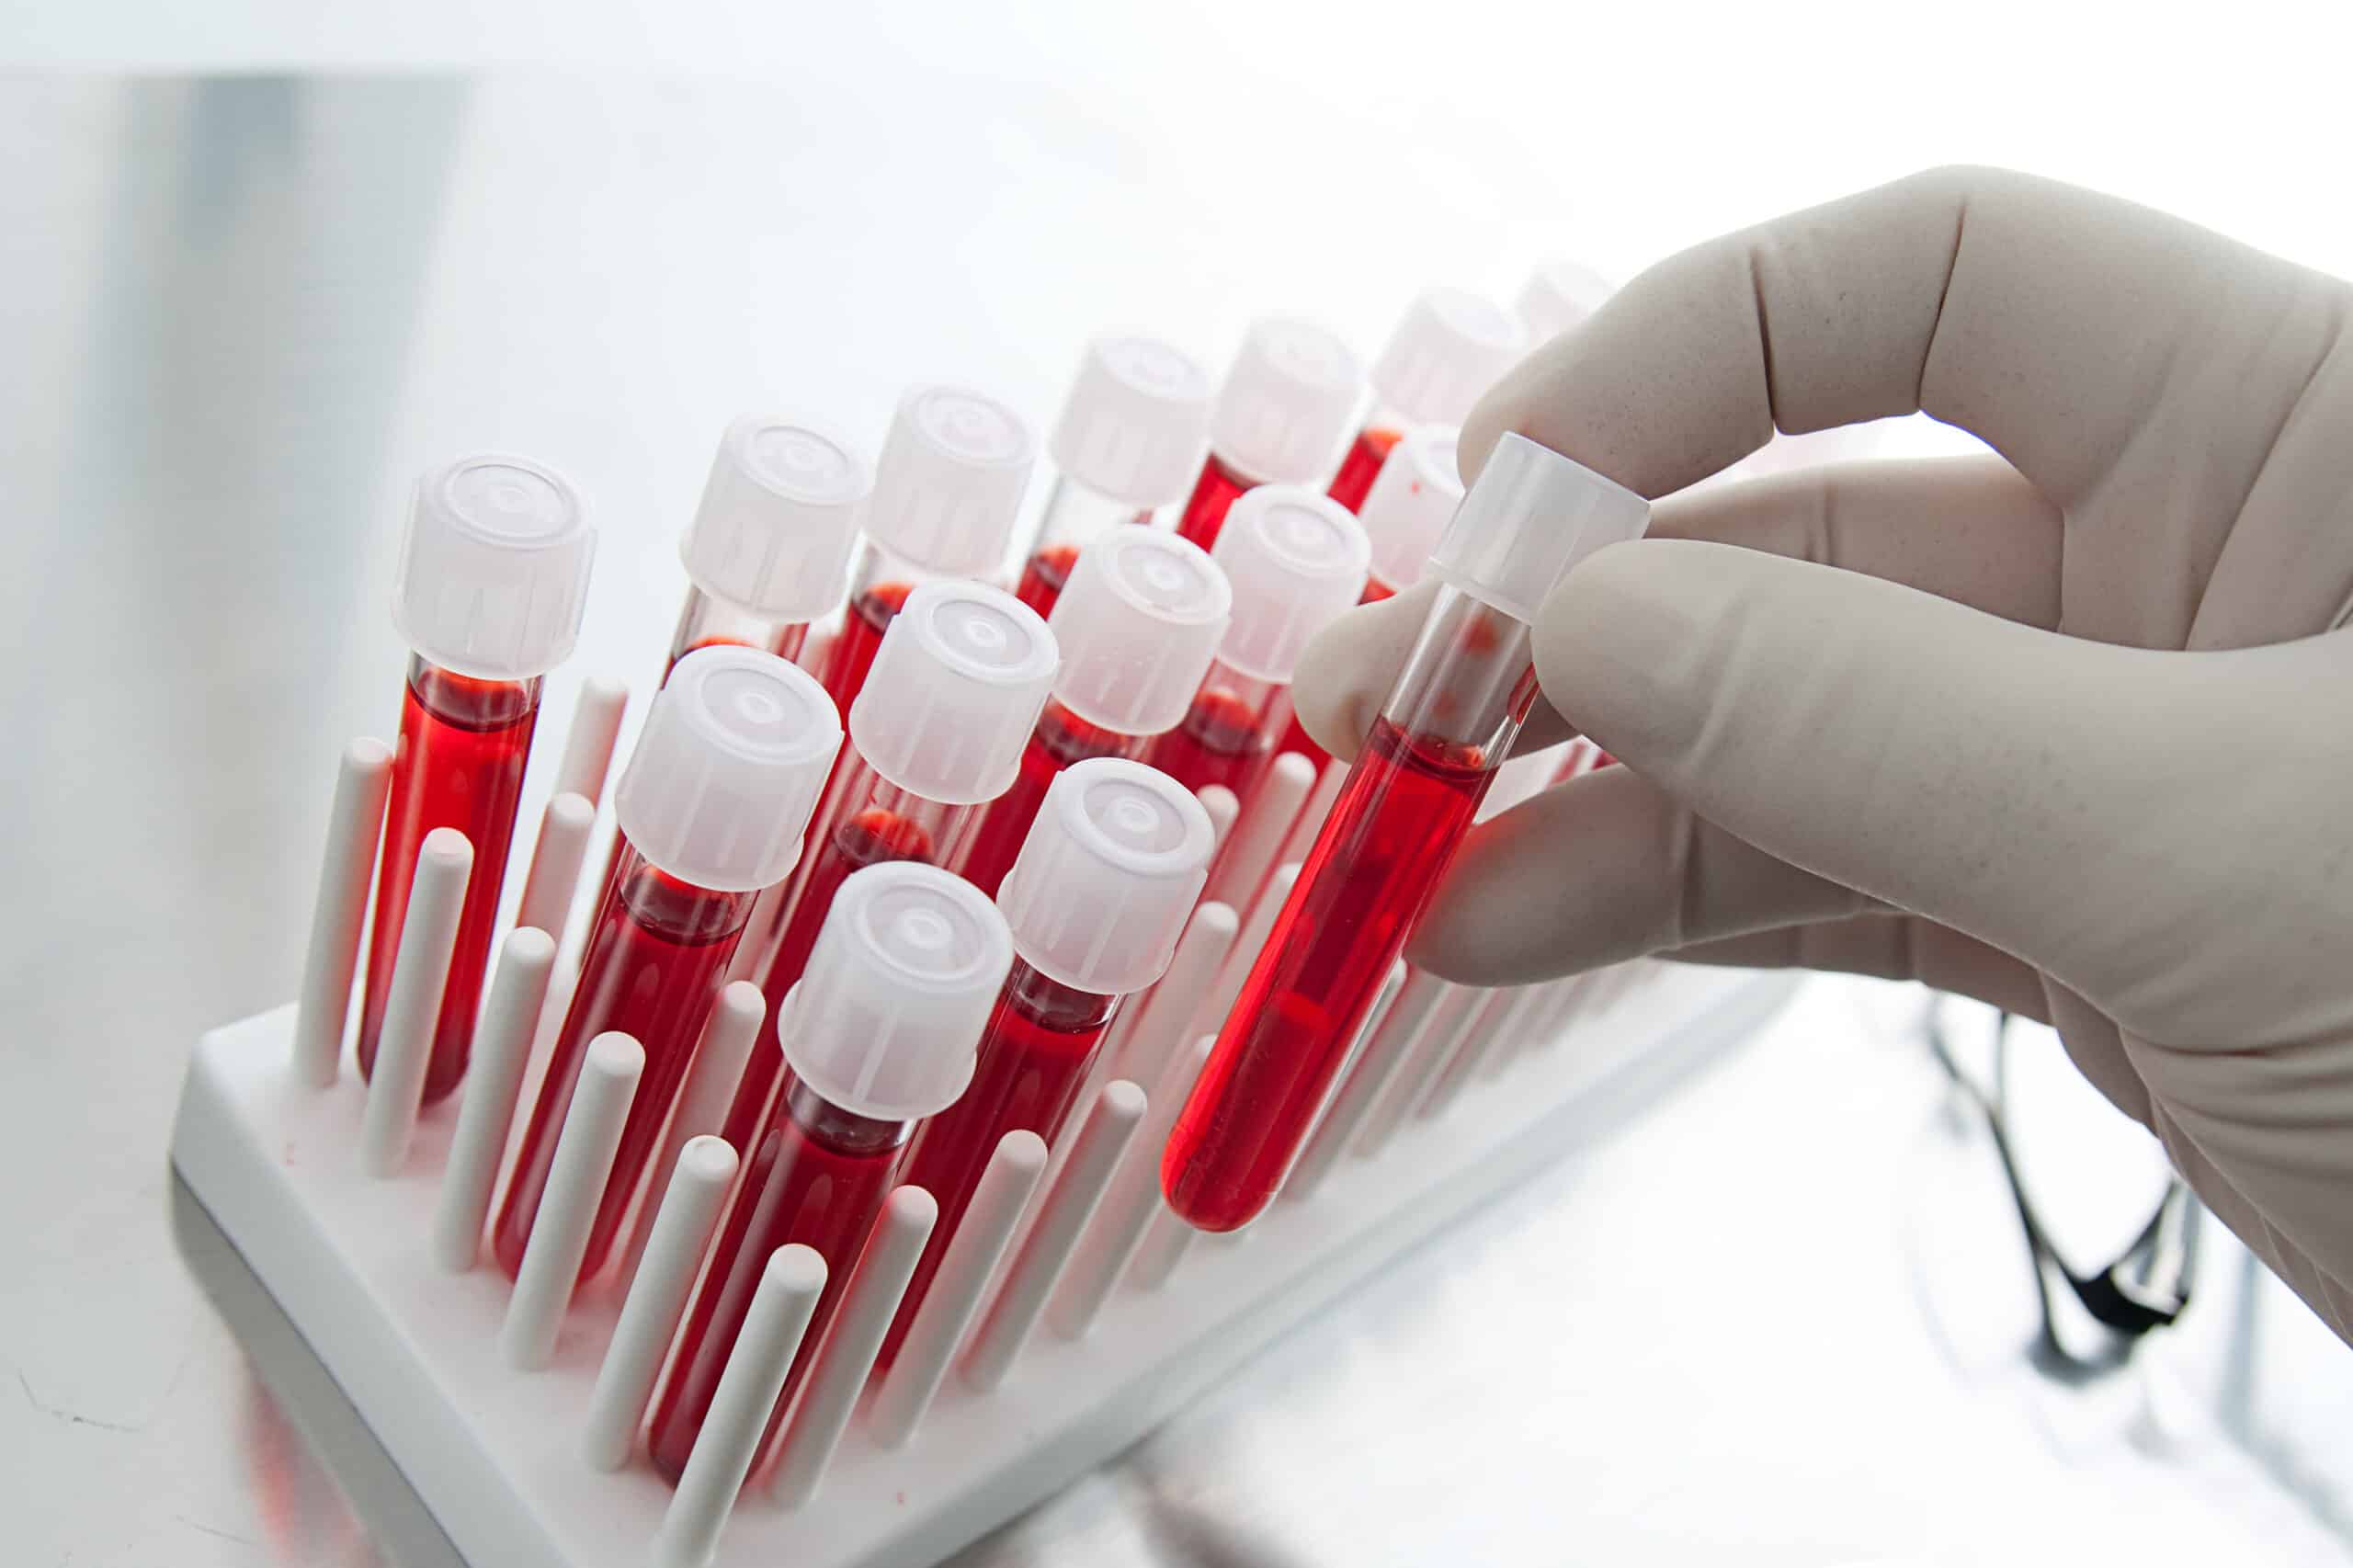 Researchers improve blood tests’ ability to detect and monitor cancer